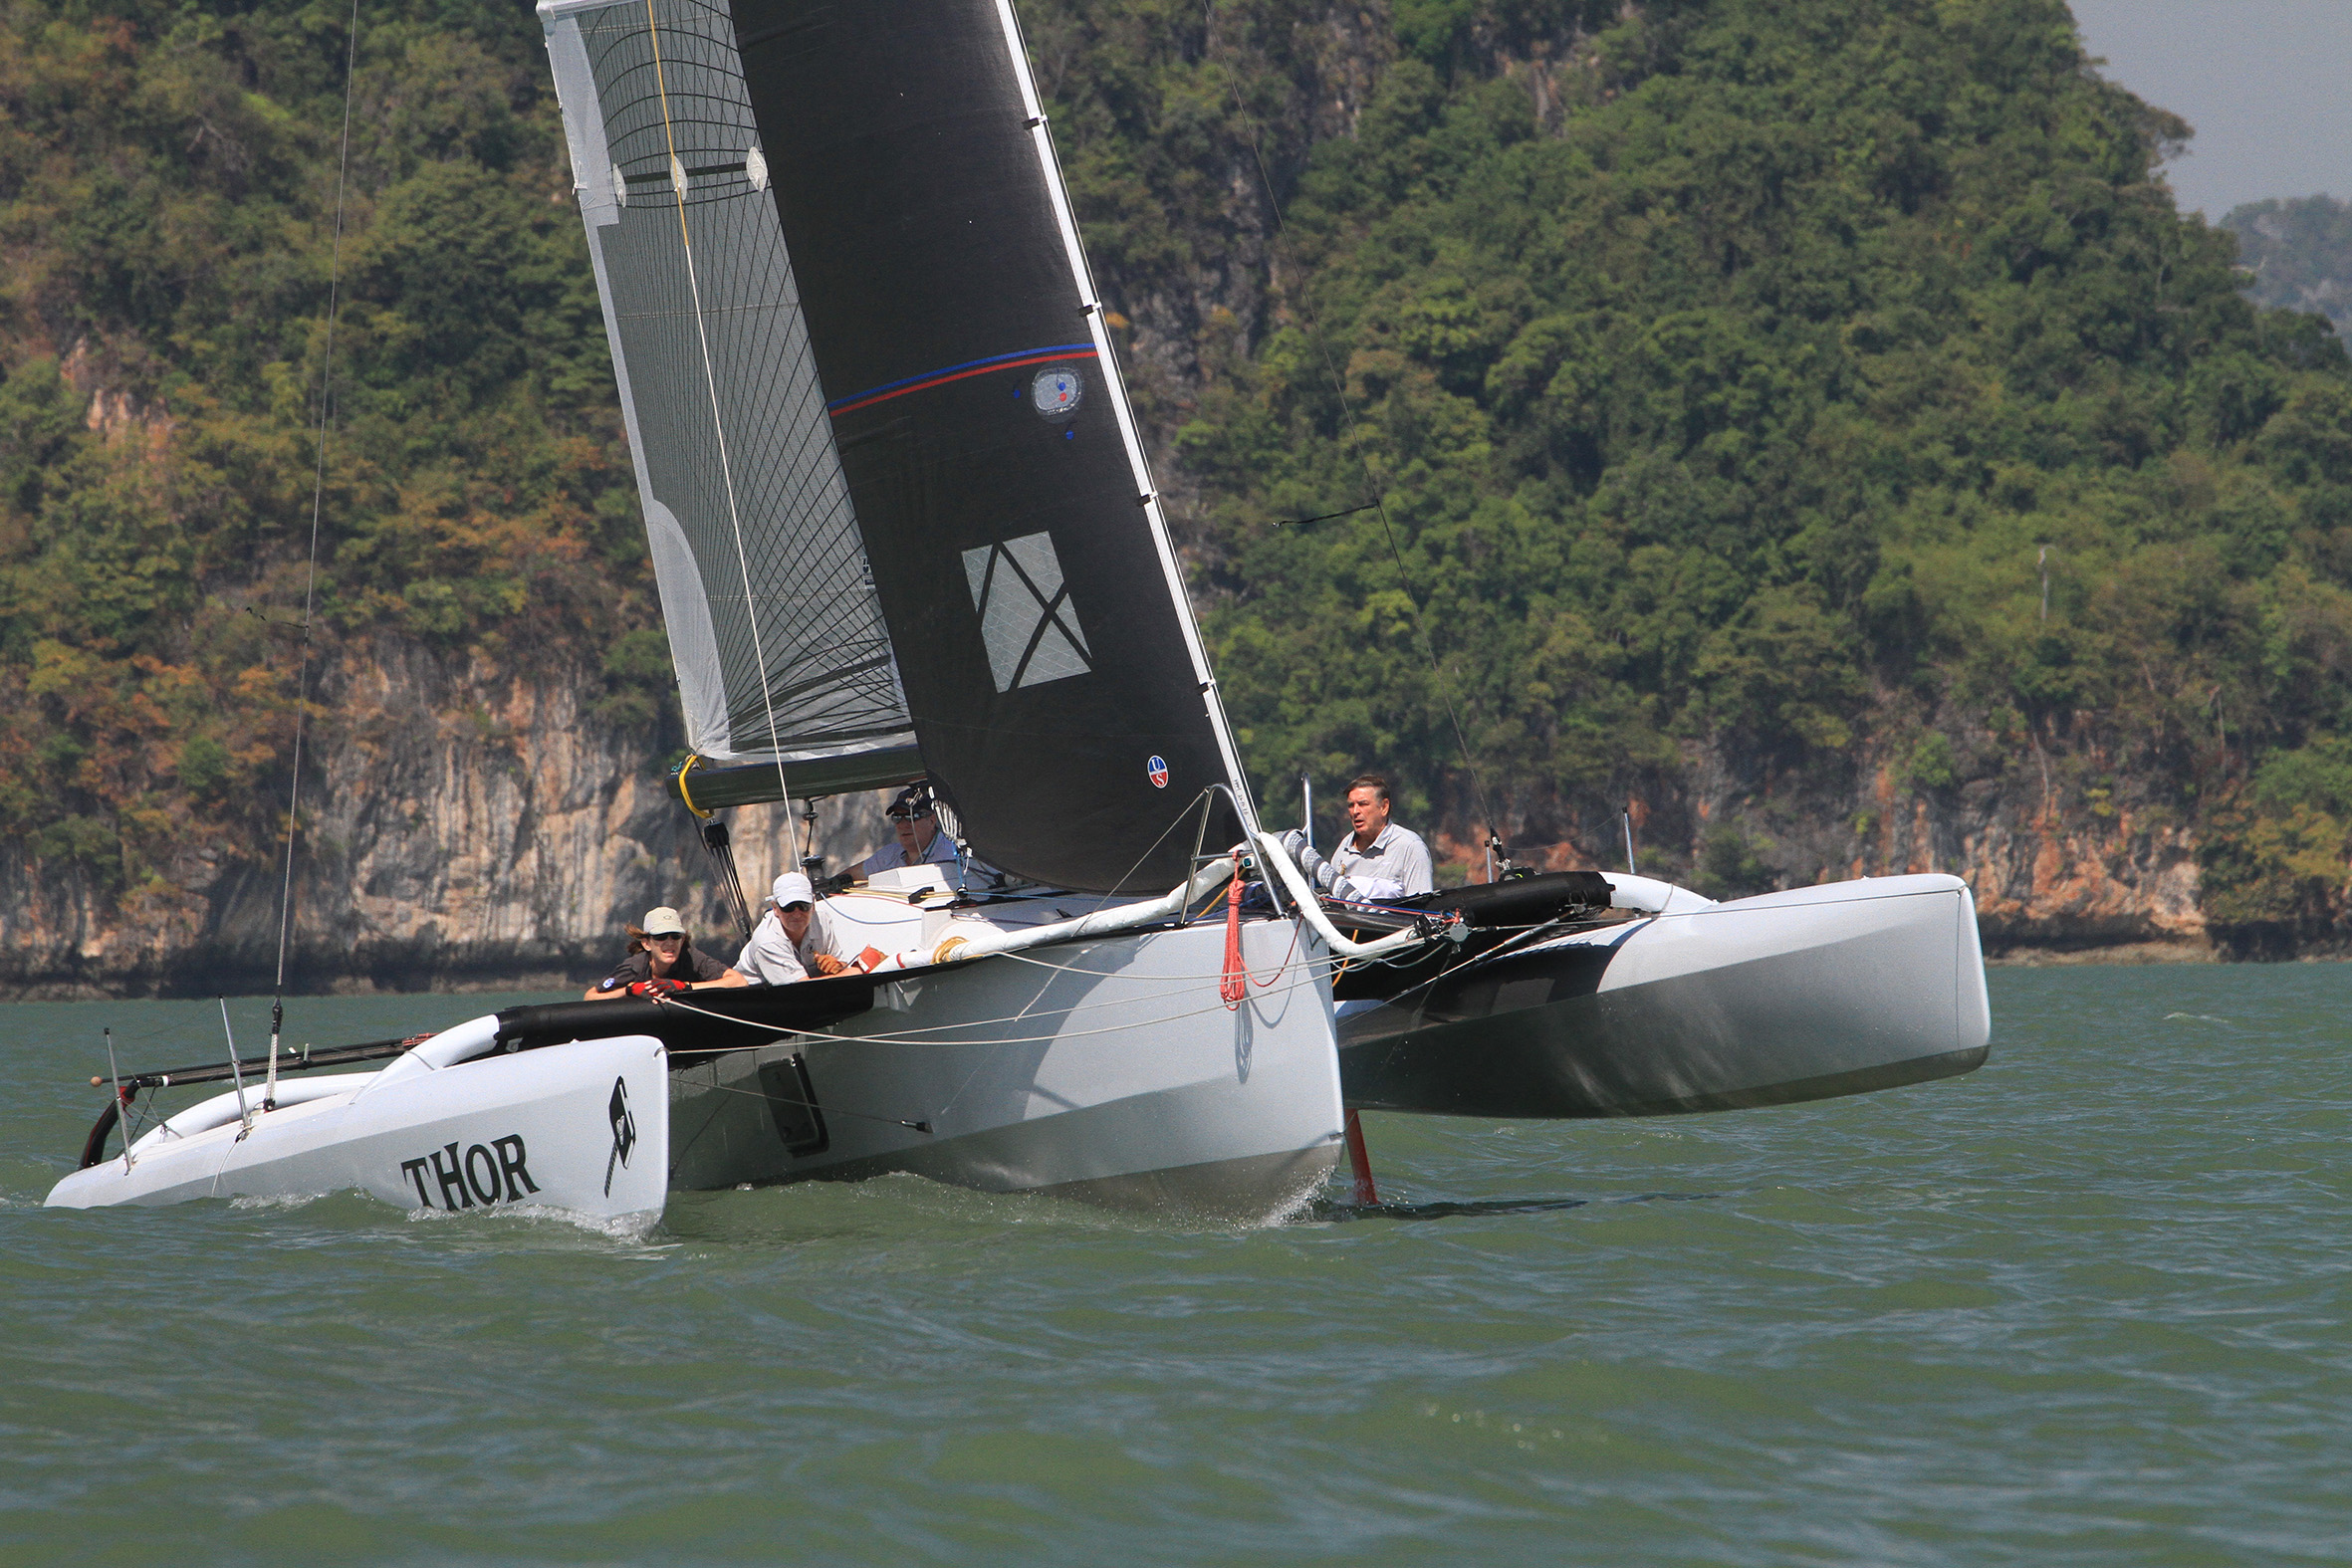 Fresh breeze on first day of The Bay Regatta